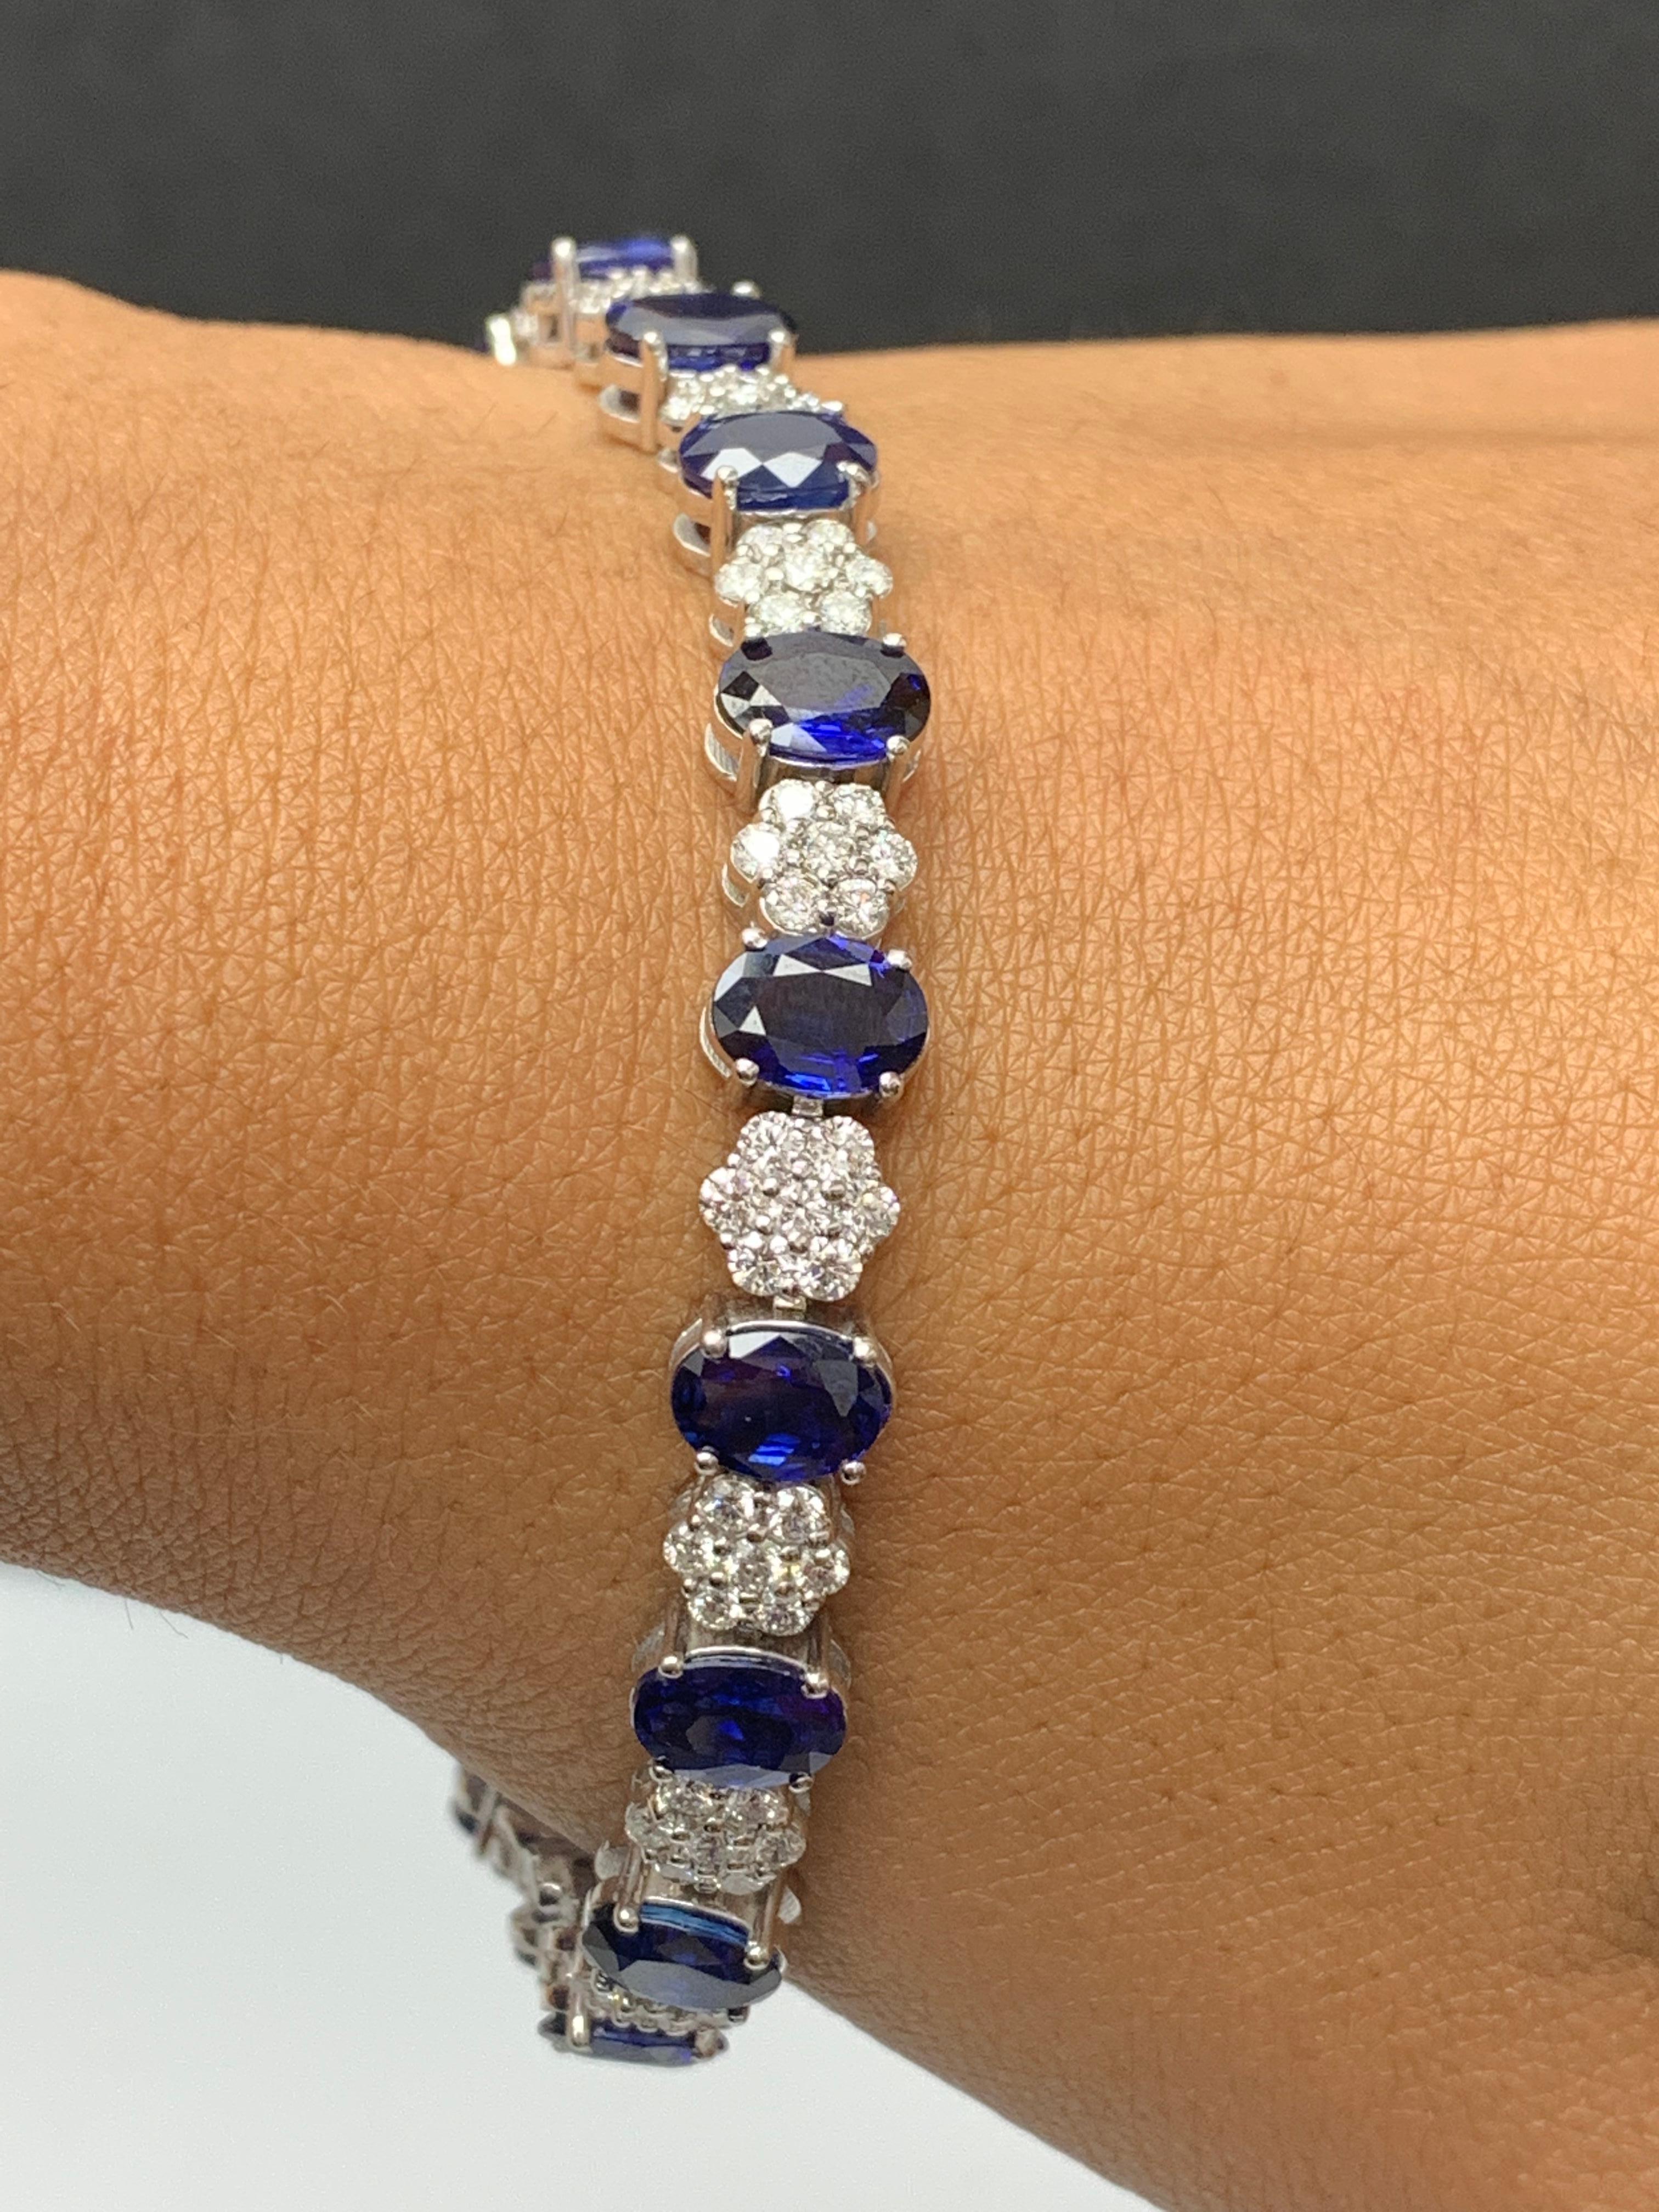 15.26 Carat Oval Cut Blue Sapphire and Diamond Tennis Bracelet in 14K White Gold For Sale 2